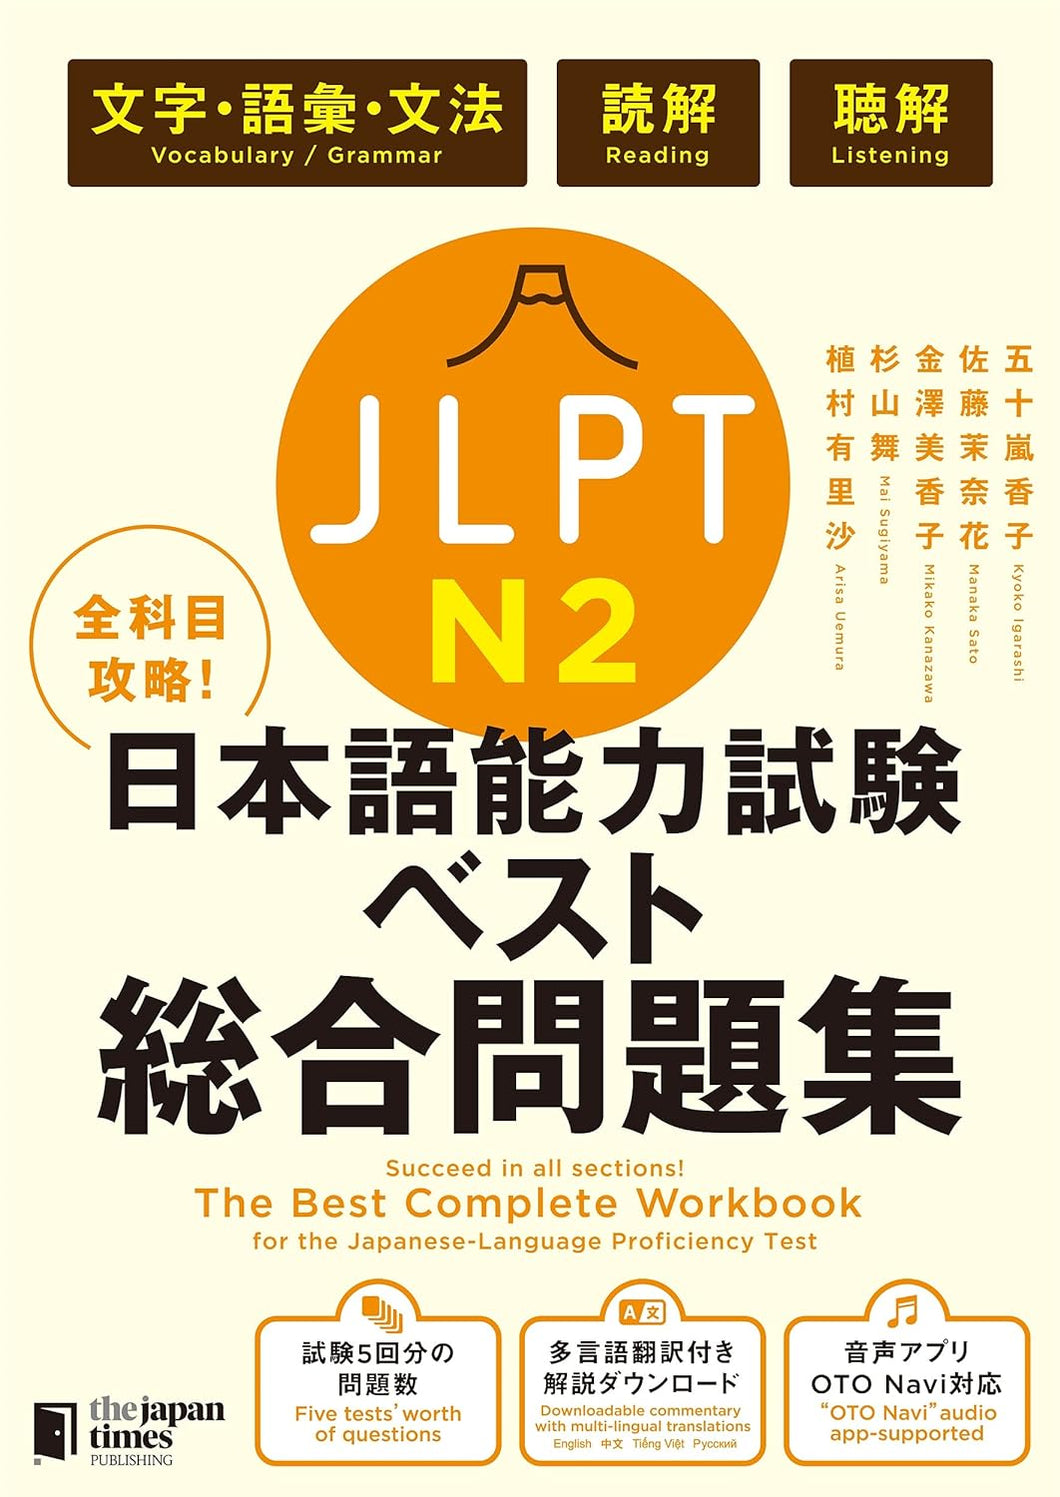 The Best Complete Workbook for the Japanese-Language Proficiency Test N2 – Language Knowledge (Vocabulary/Grammar), Reading & Listening